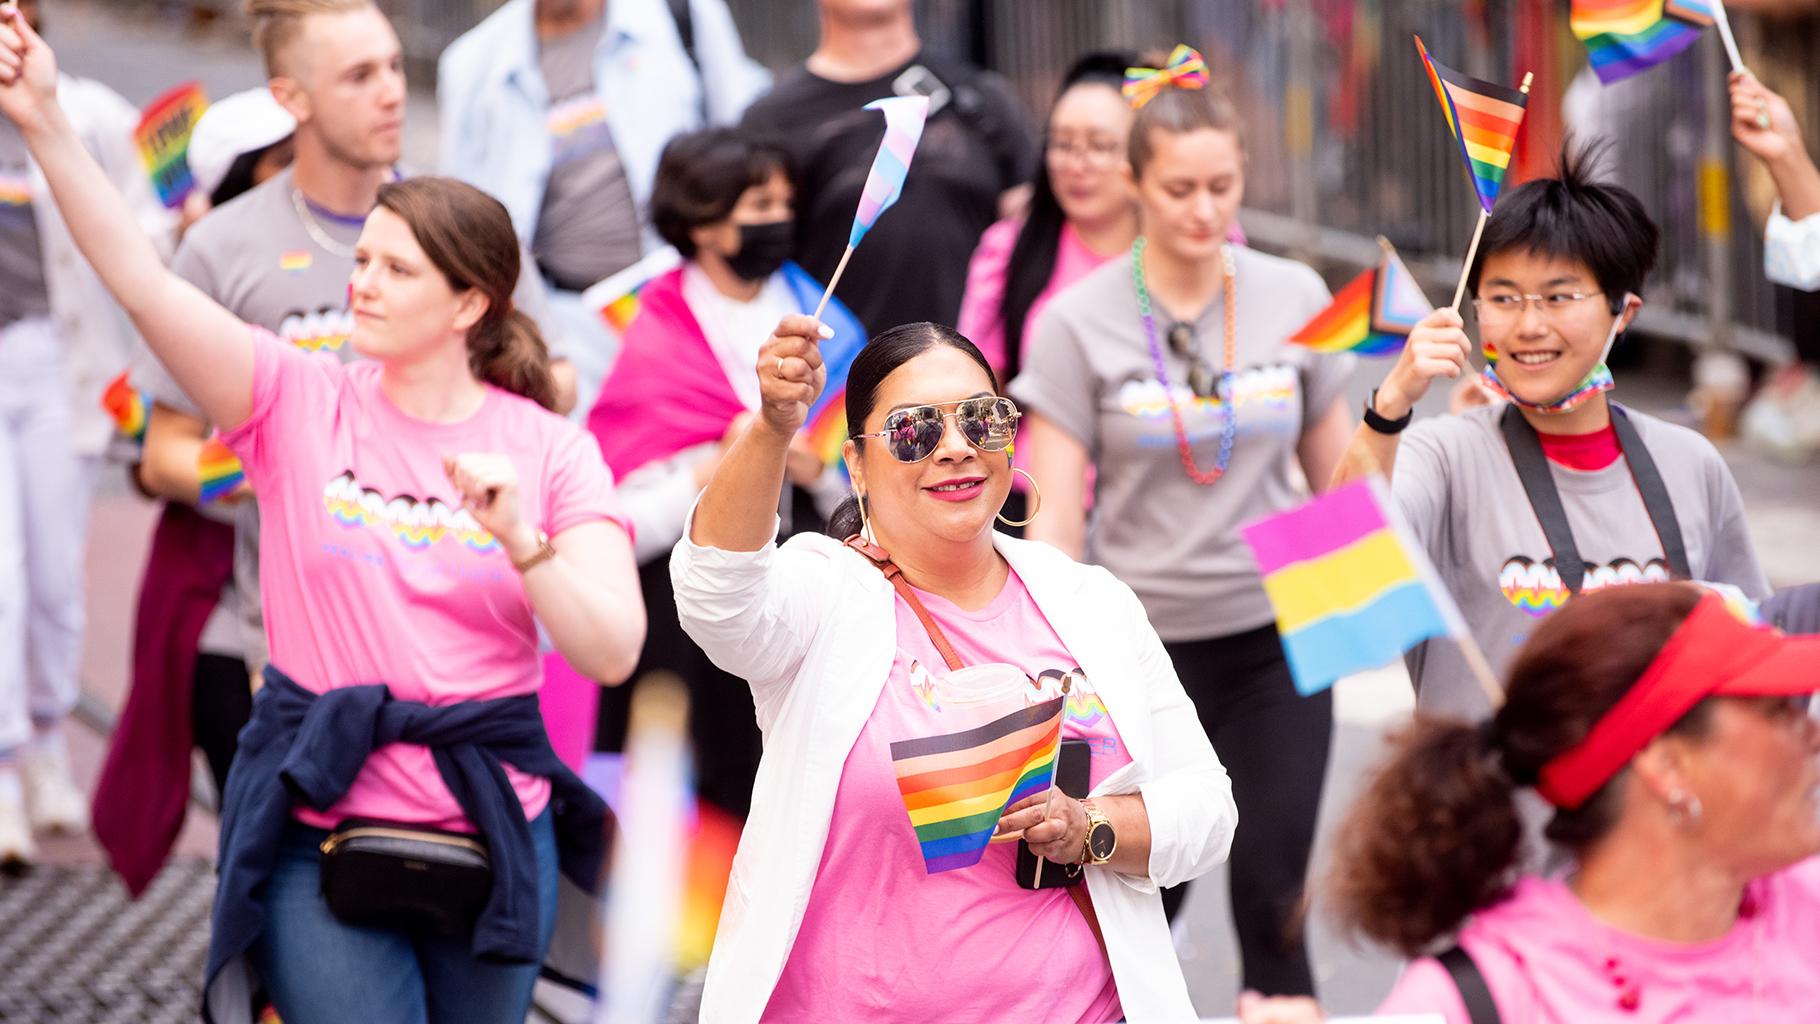 UCSF employees wave pride flags while marching in SF Pride march